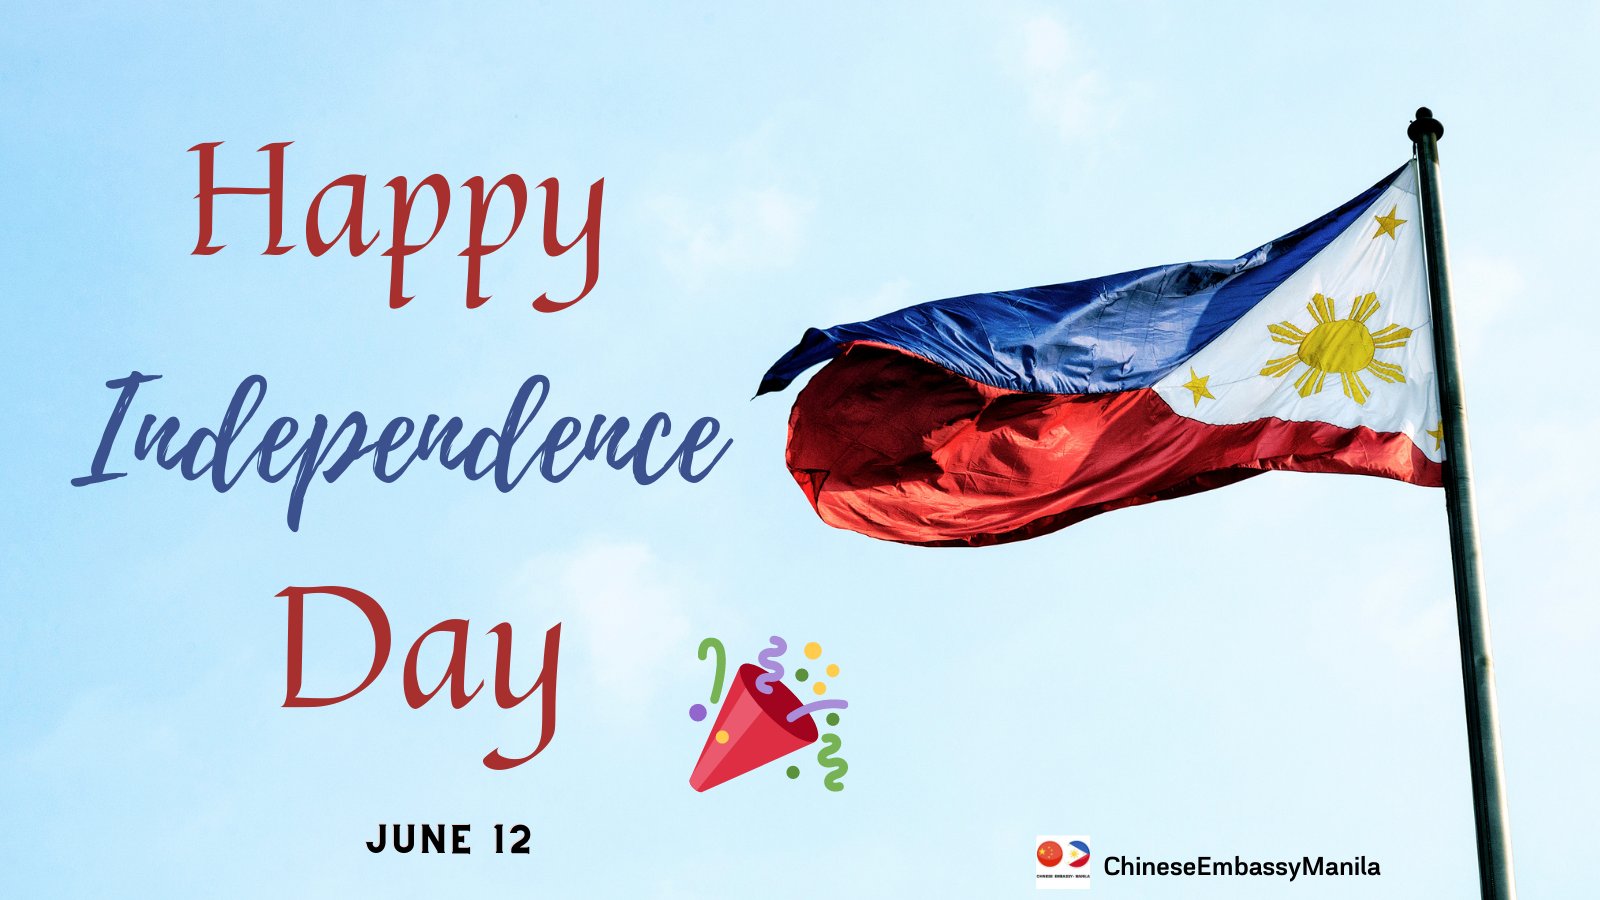 Chineseembassymanila Happy Independence Day Philippines Best Wishes And Congratulations From Chinese Embassy Manila We Wish The People Of The Republic Of The Philippines A Happy And Prosperous Independence Day On